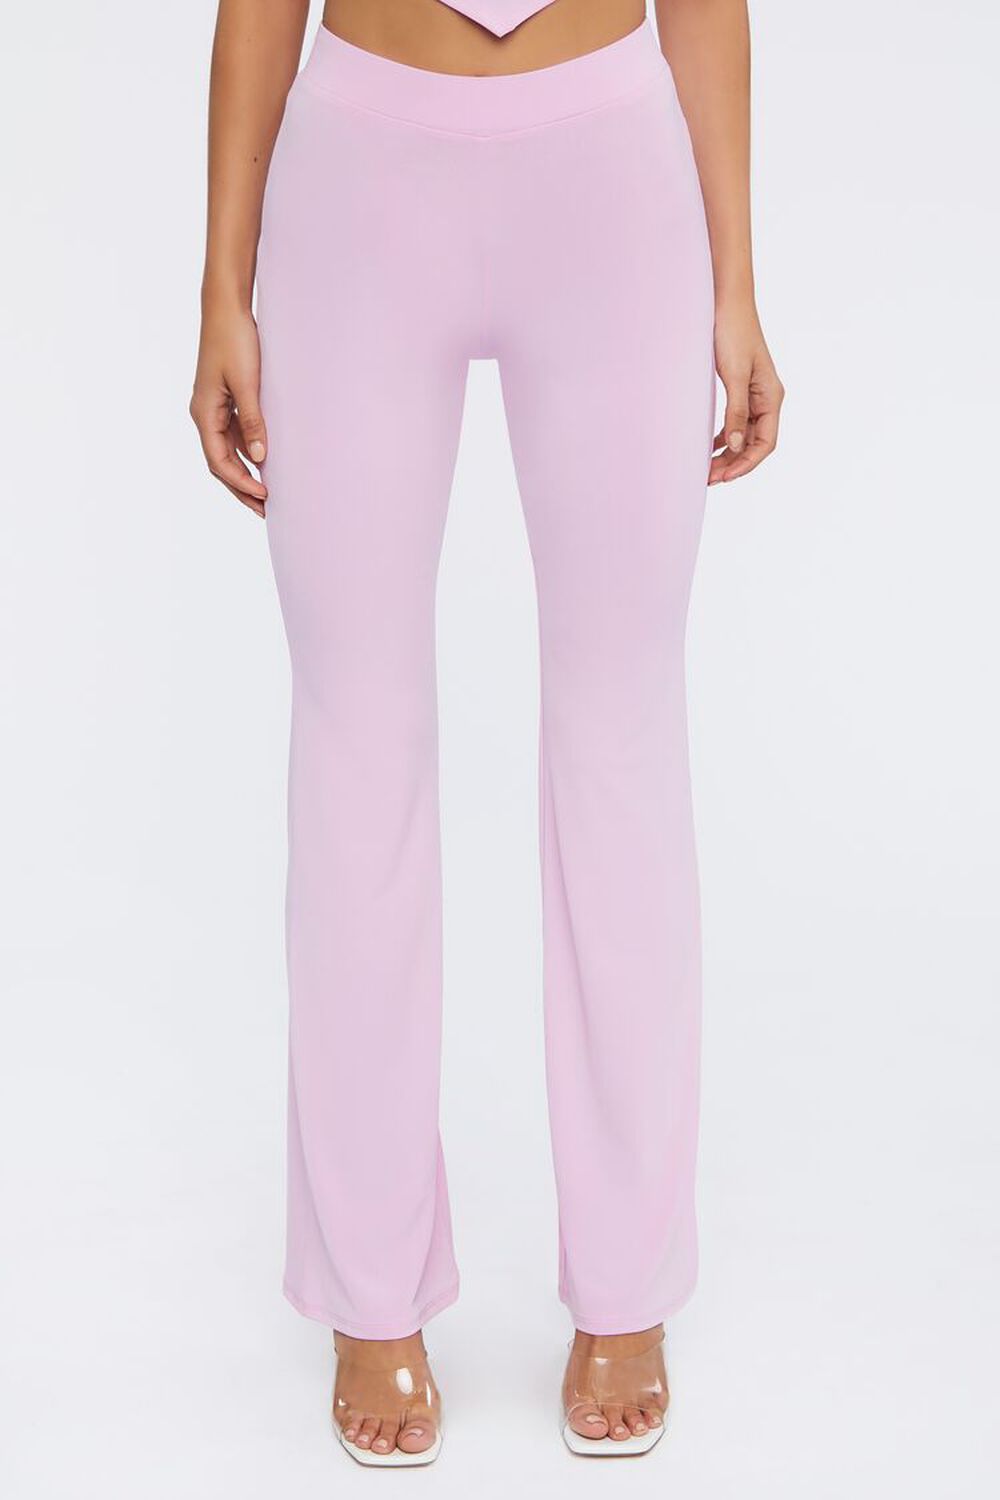 WISTERIA Jersey Knit High-Rise Pants, image 2